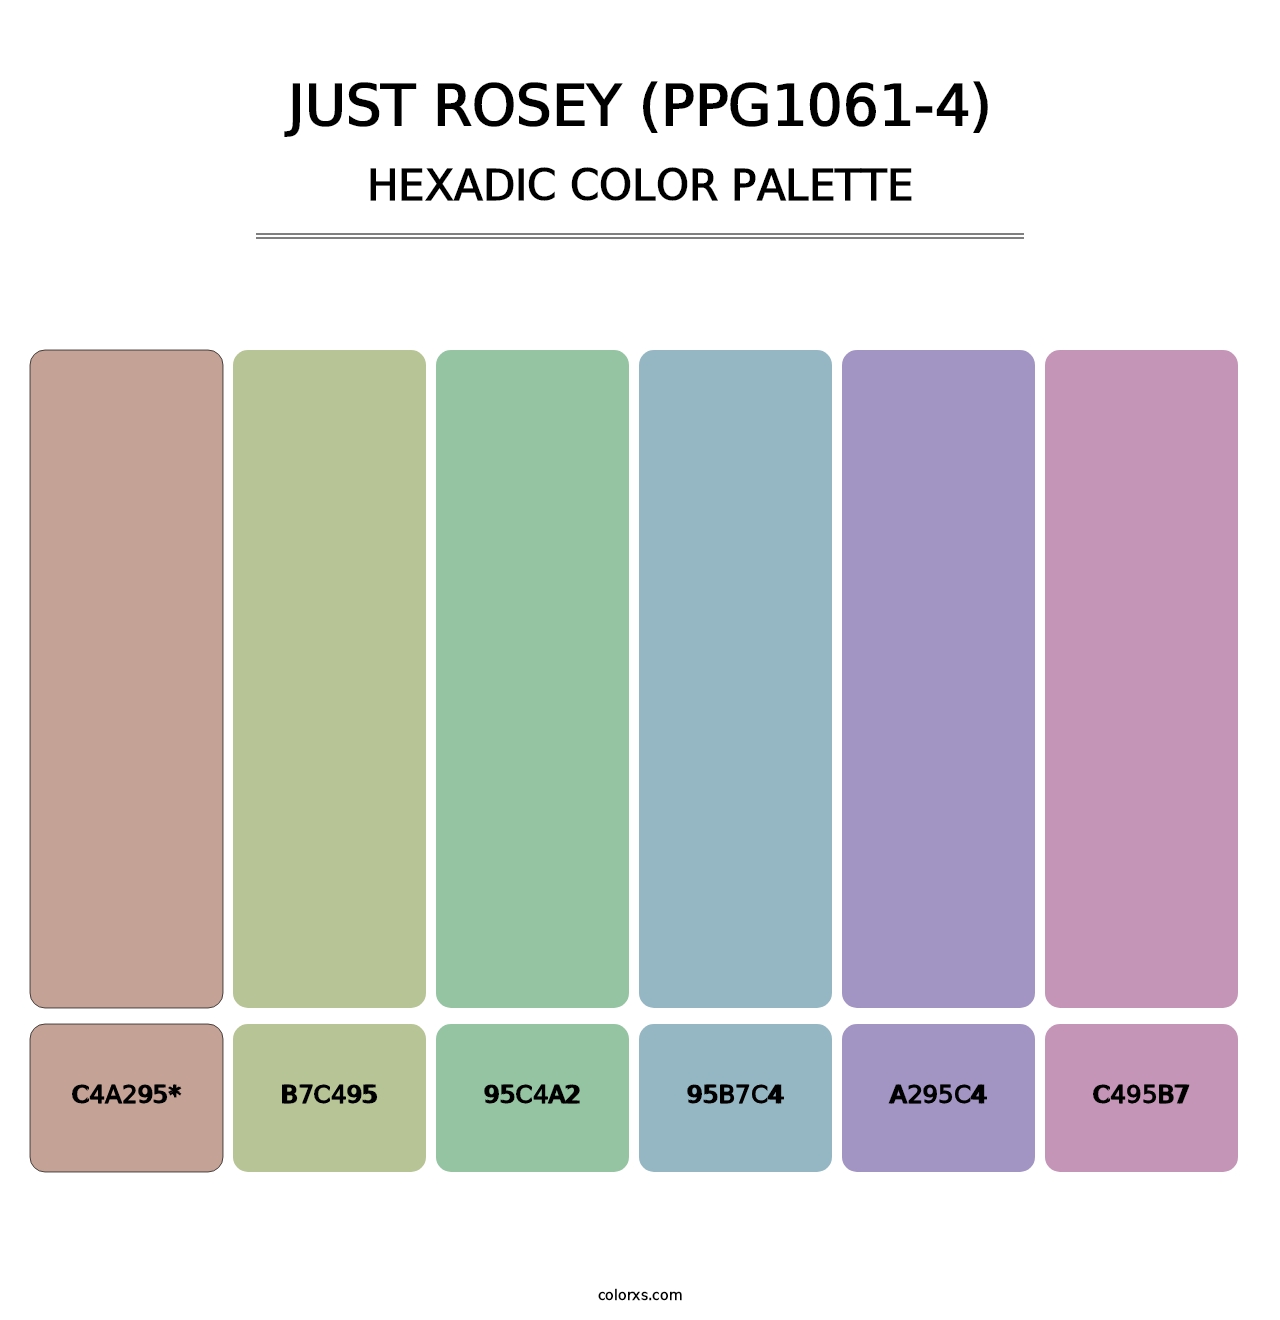 Just Rosey (PPG1061-4) - Hexadic Color Palette